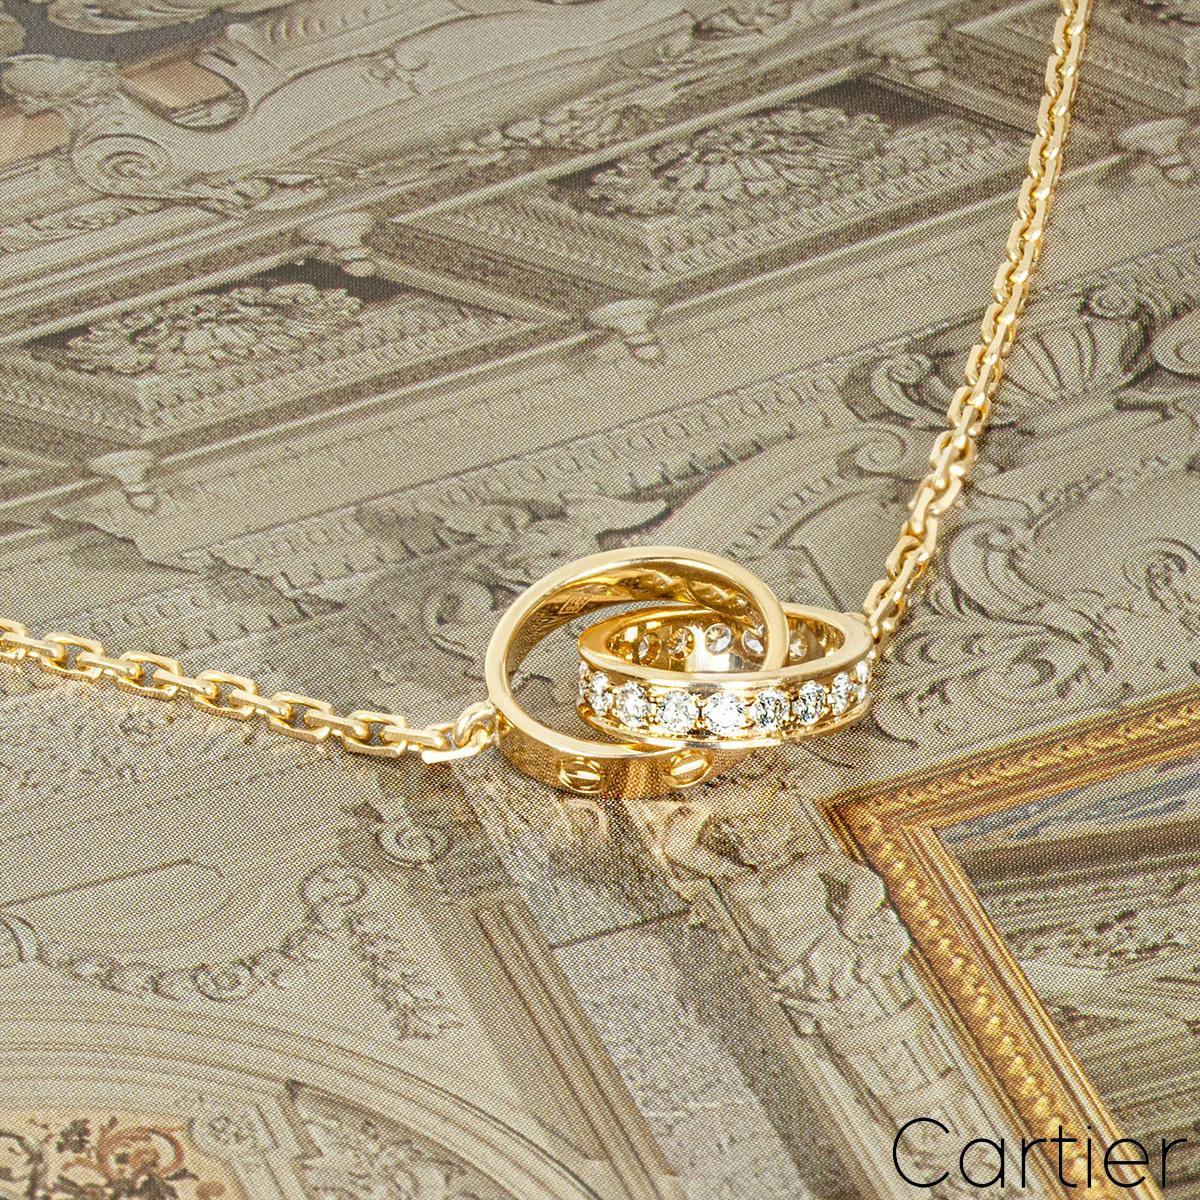 Cartier 18k Yellow Gold Diamond Love Necklace B7013800 For Sale 1